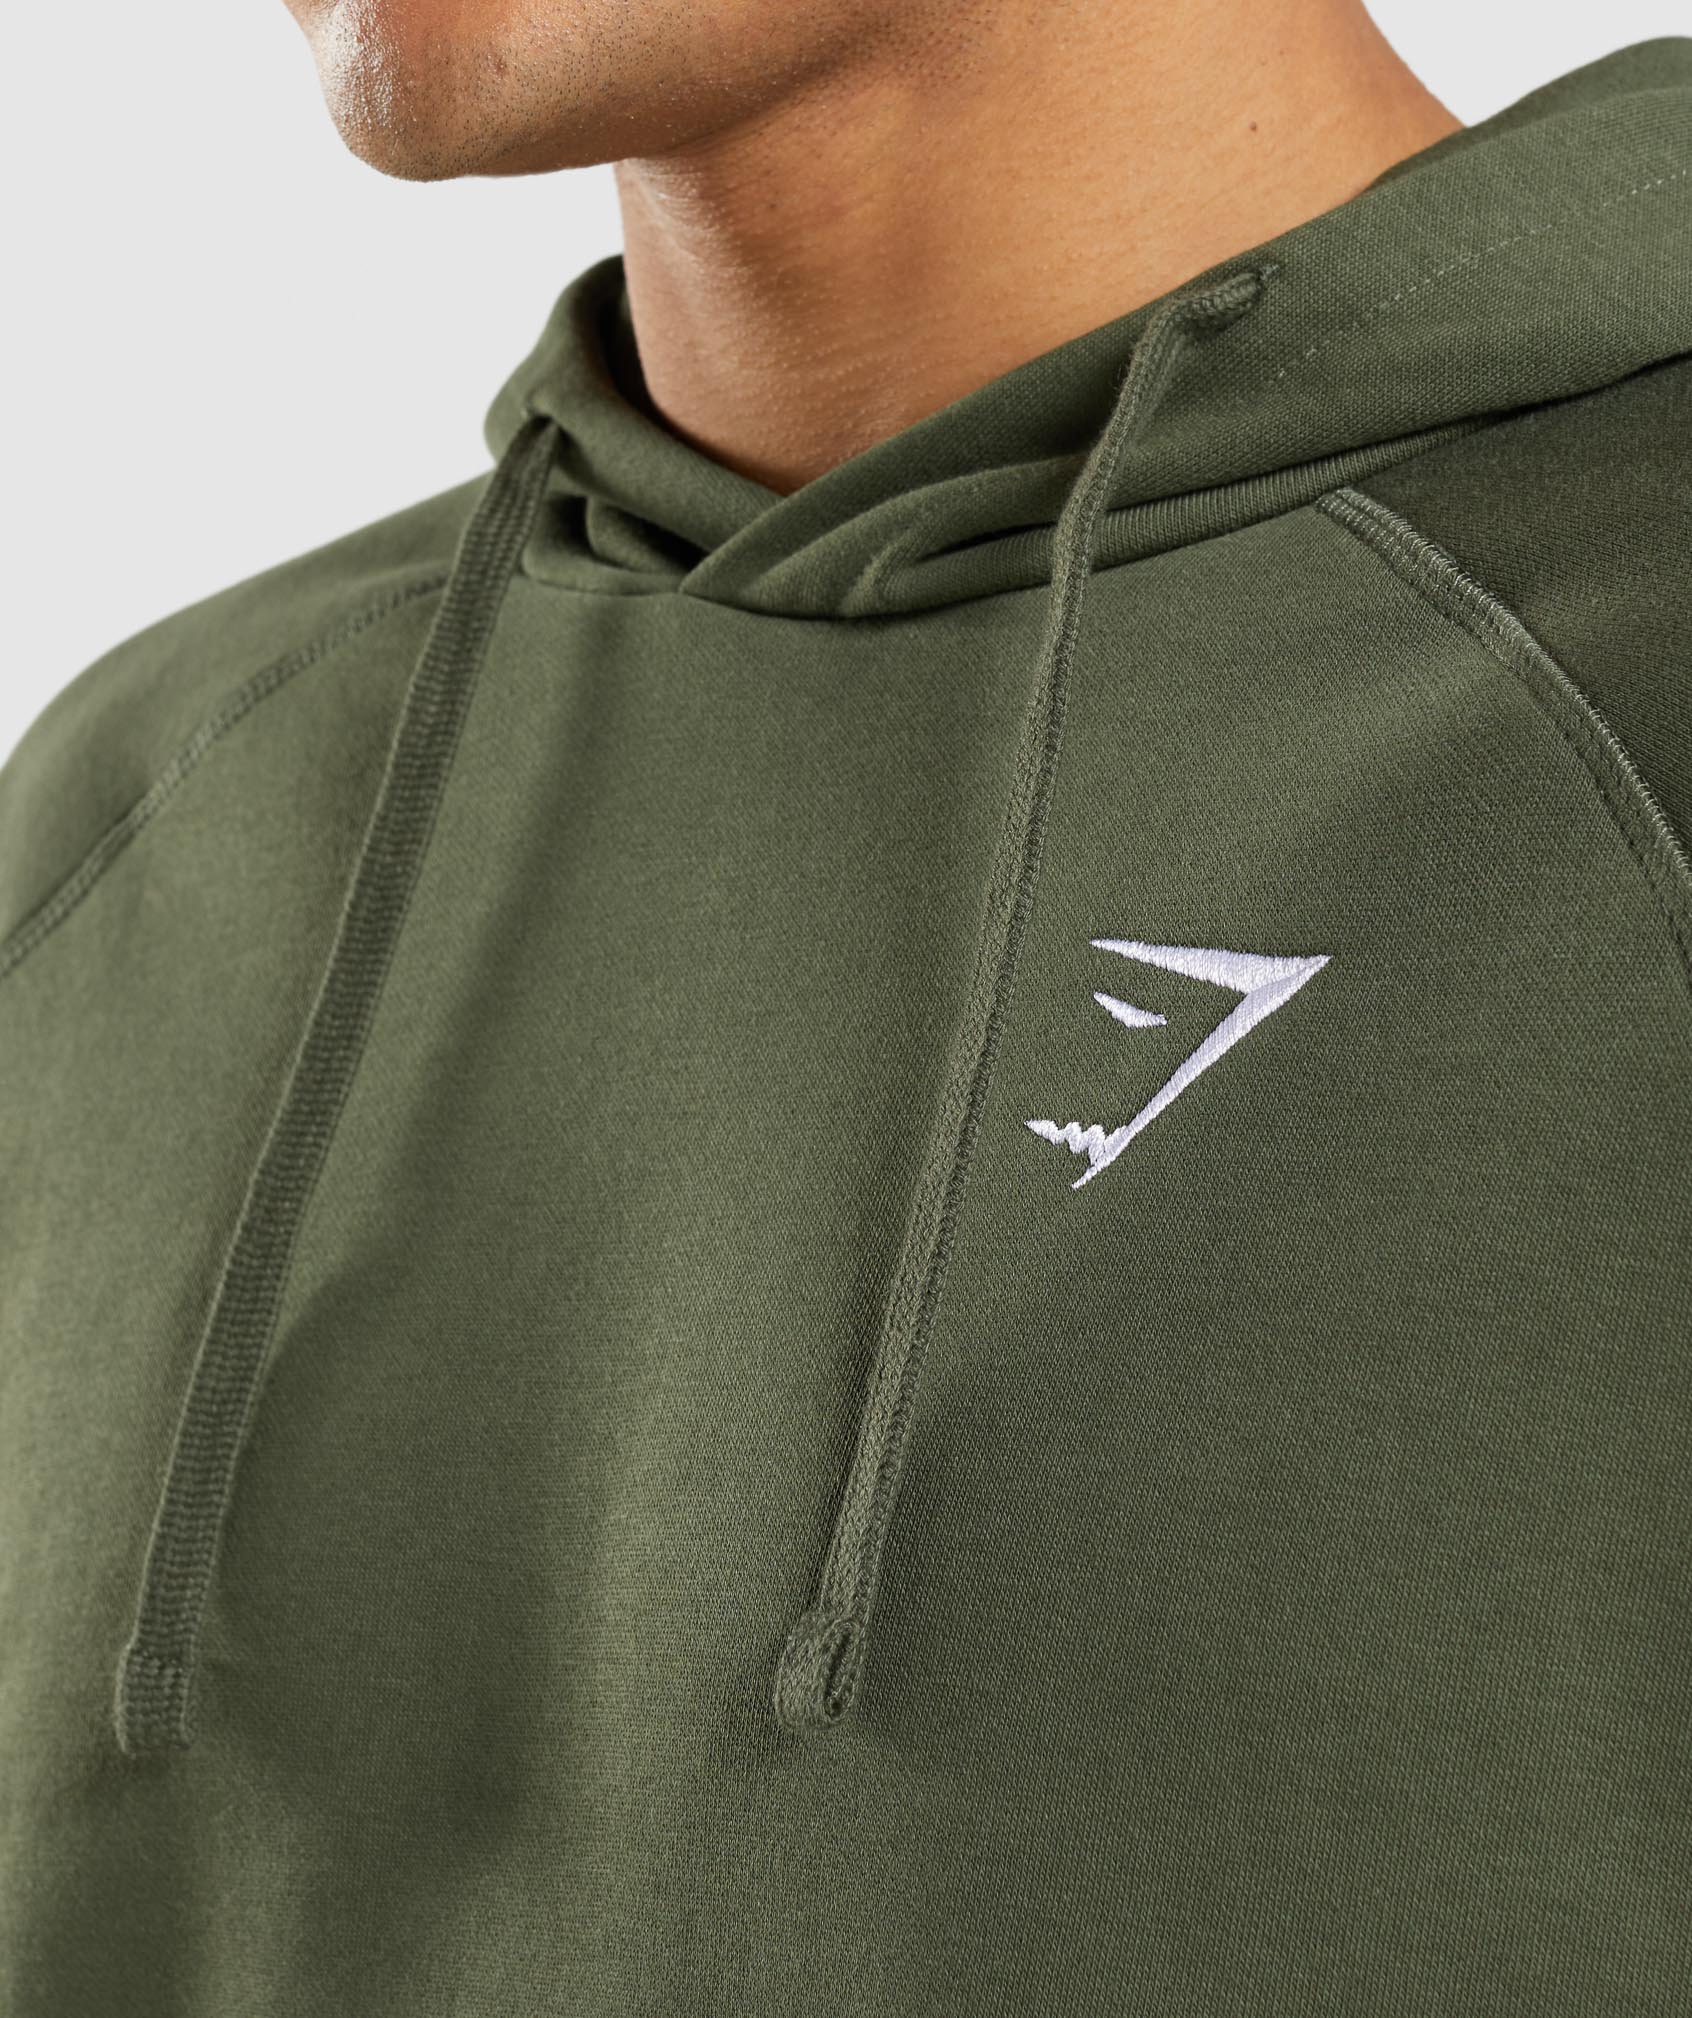 Gymshark - Ready for the streets. Shop the Crest Pullover Hoodie at Gymshark.com